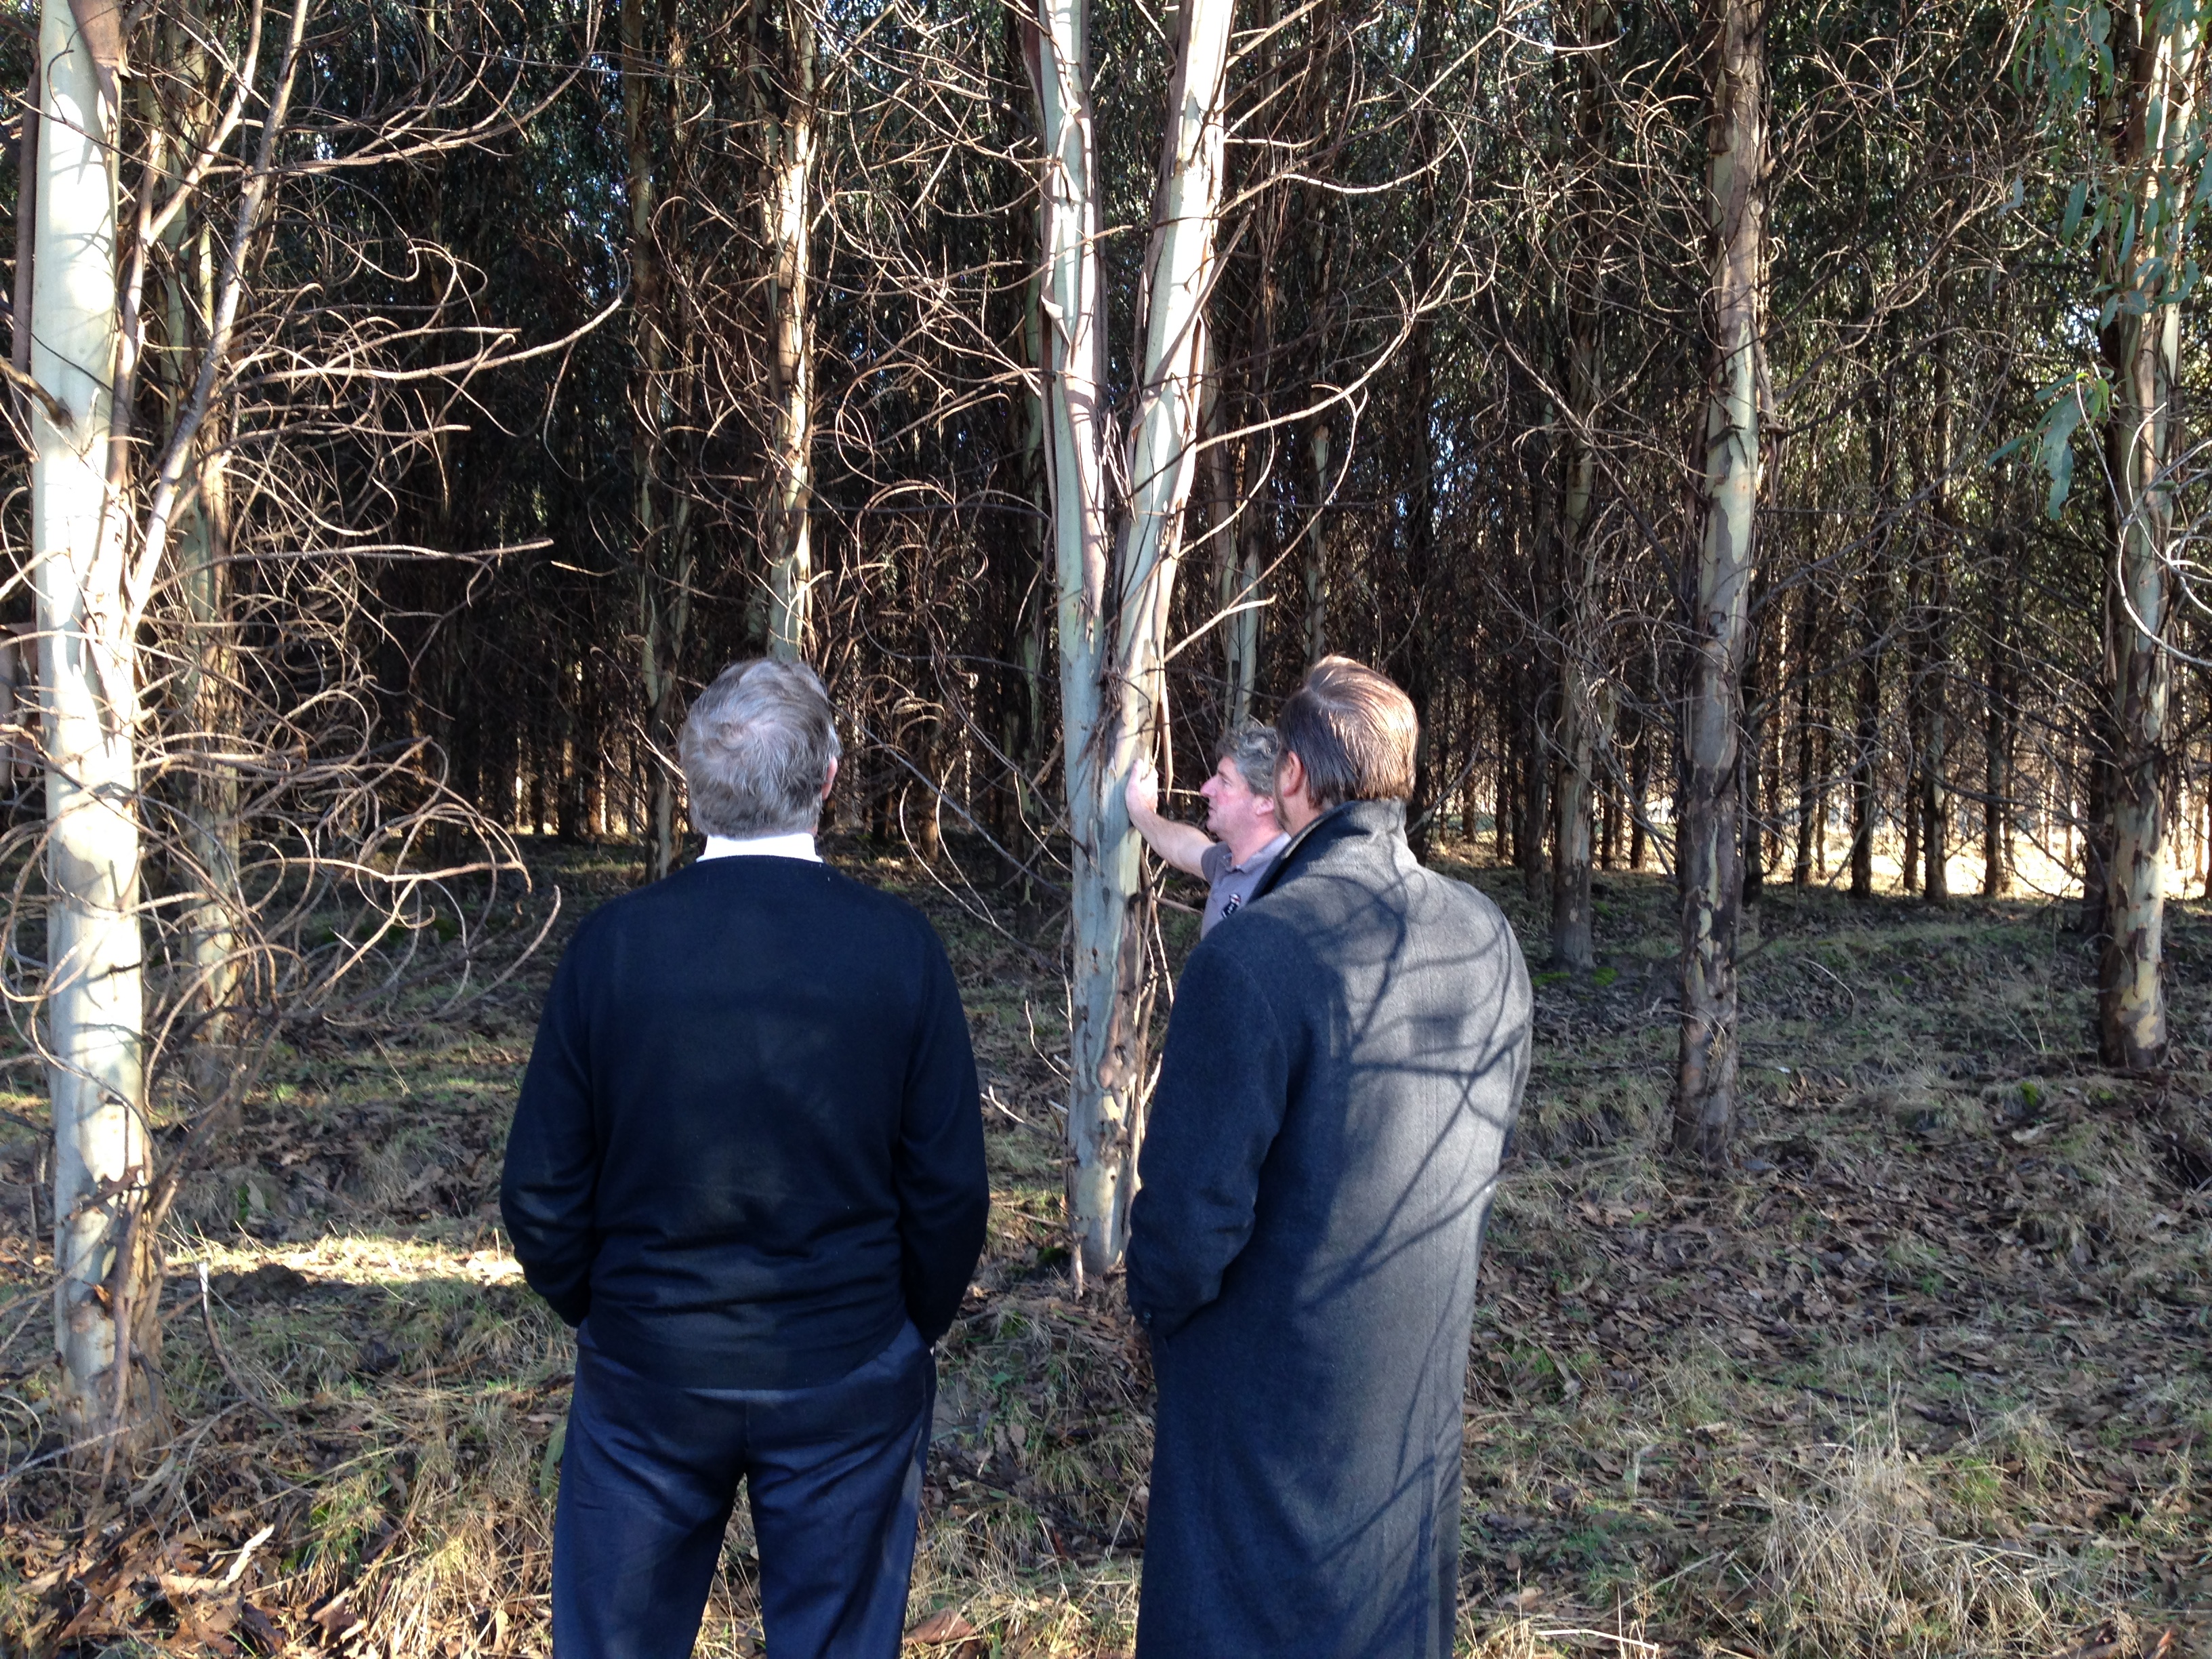 The committee examine a plantation near Launceston where tree growth rates did not meet the expectations outlined in the prospectus, 5 August 2015.